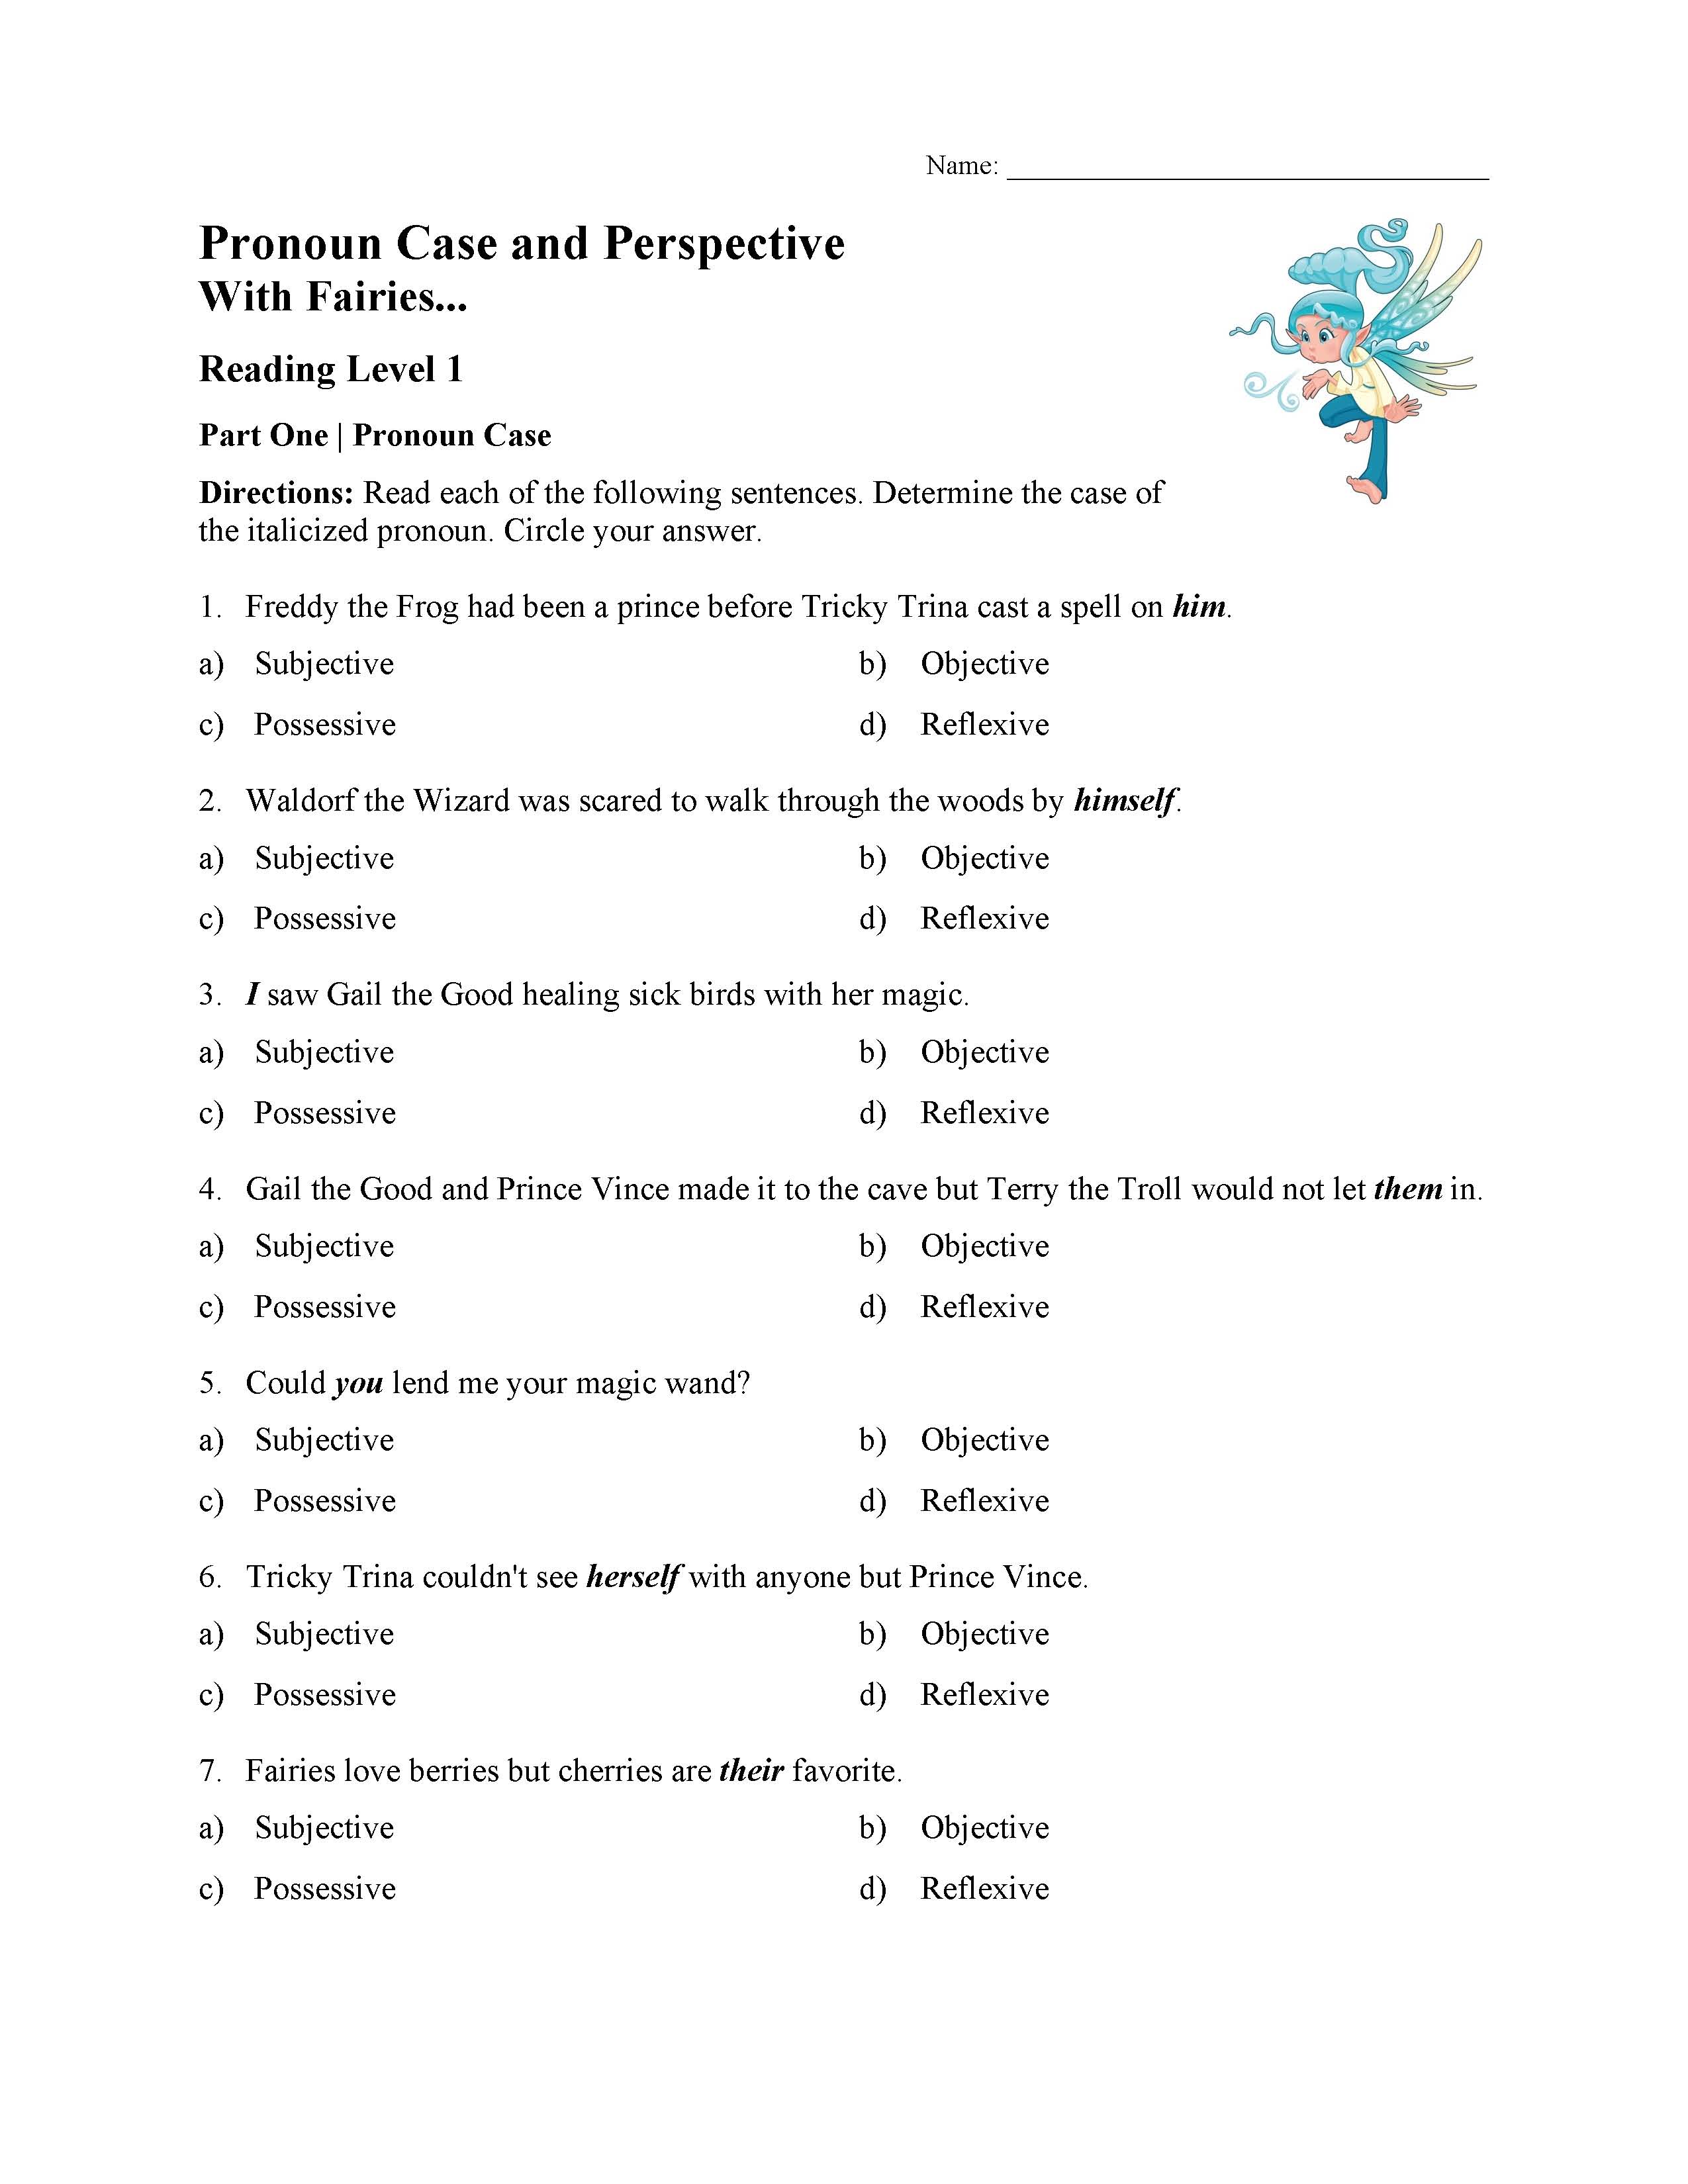 Pronoun Case And Perspective Test With Fairies Reading Level 1 Preview